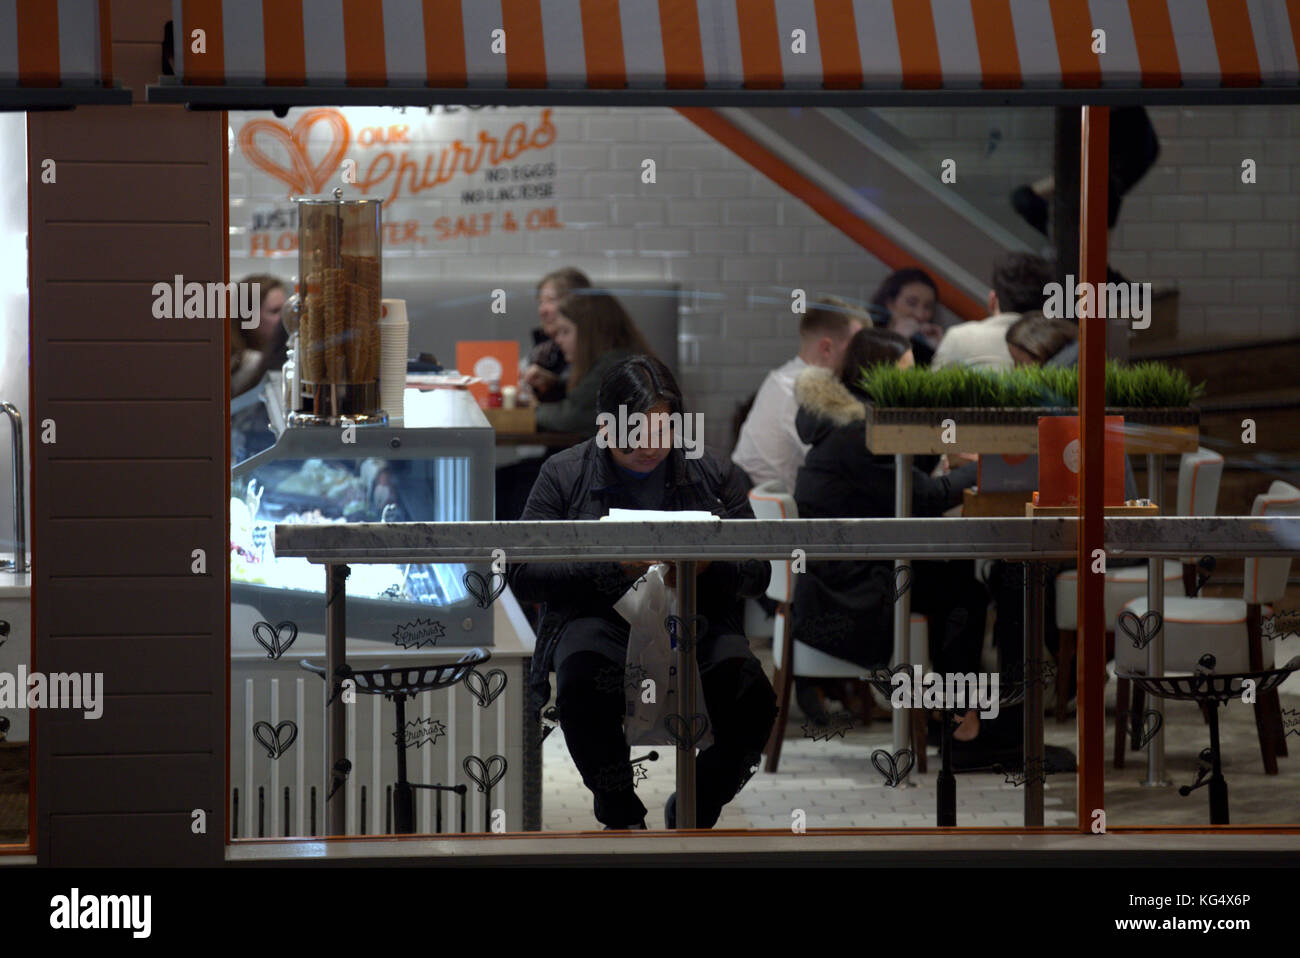 fast food restaurant window from the street cafe customers at night candid interior lit scene Stock Photo